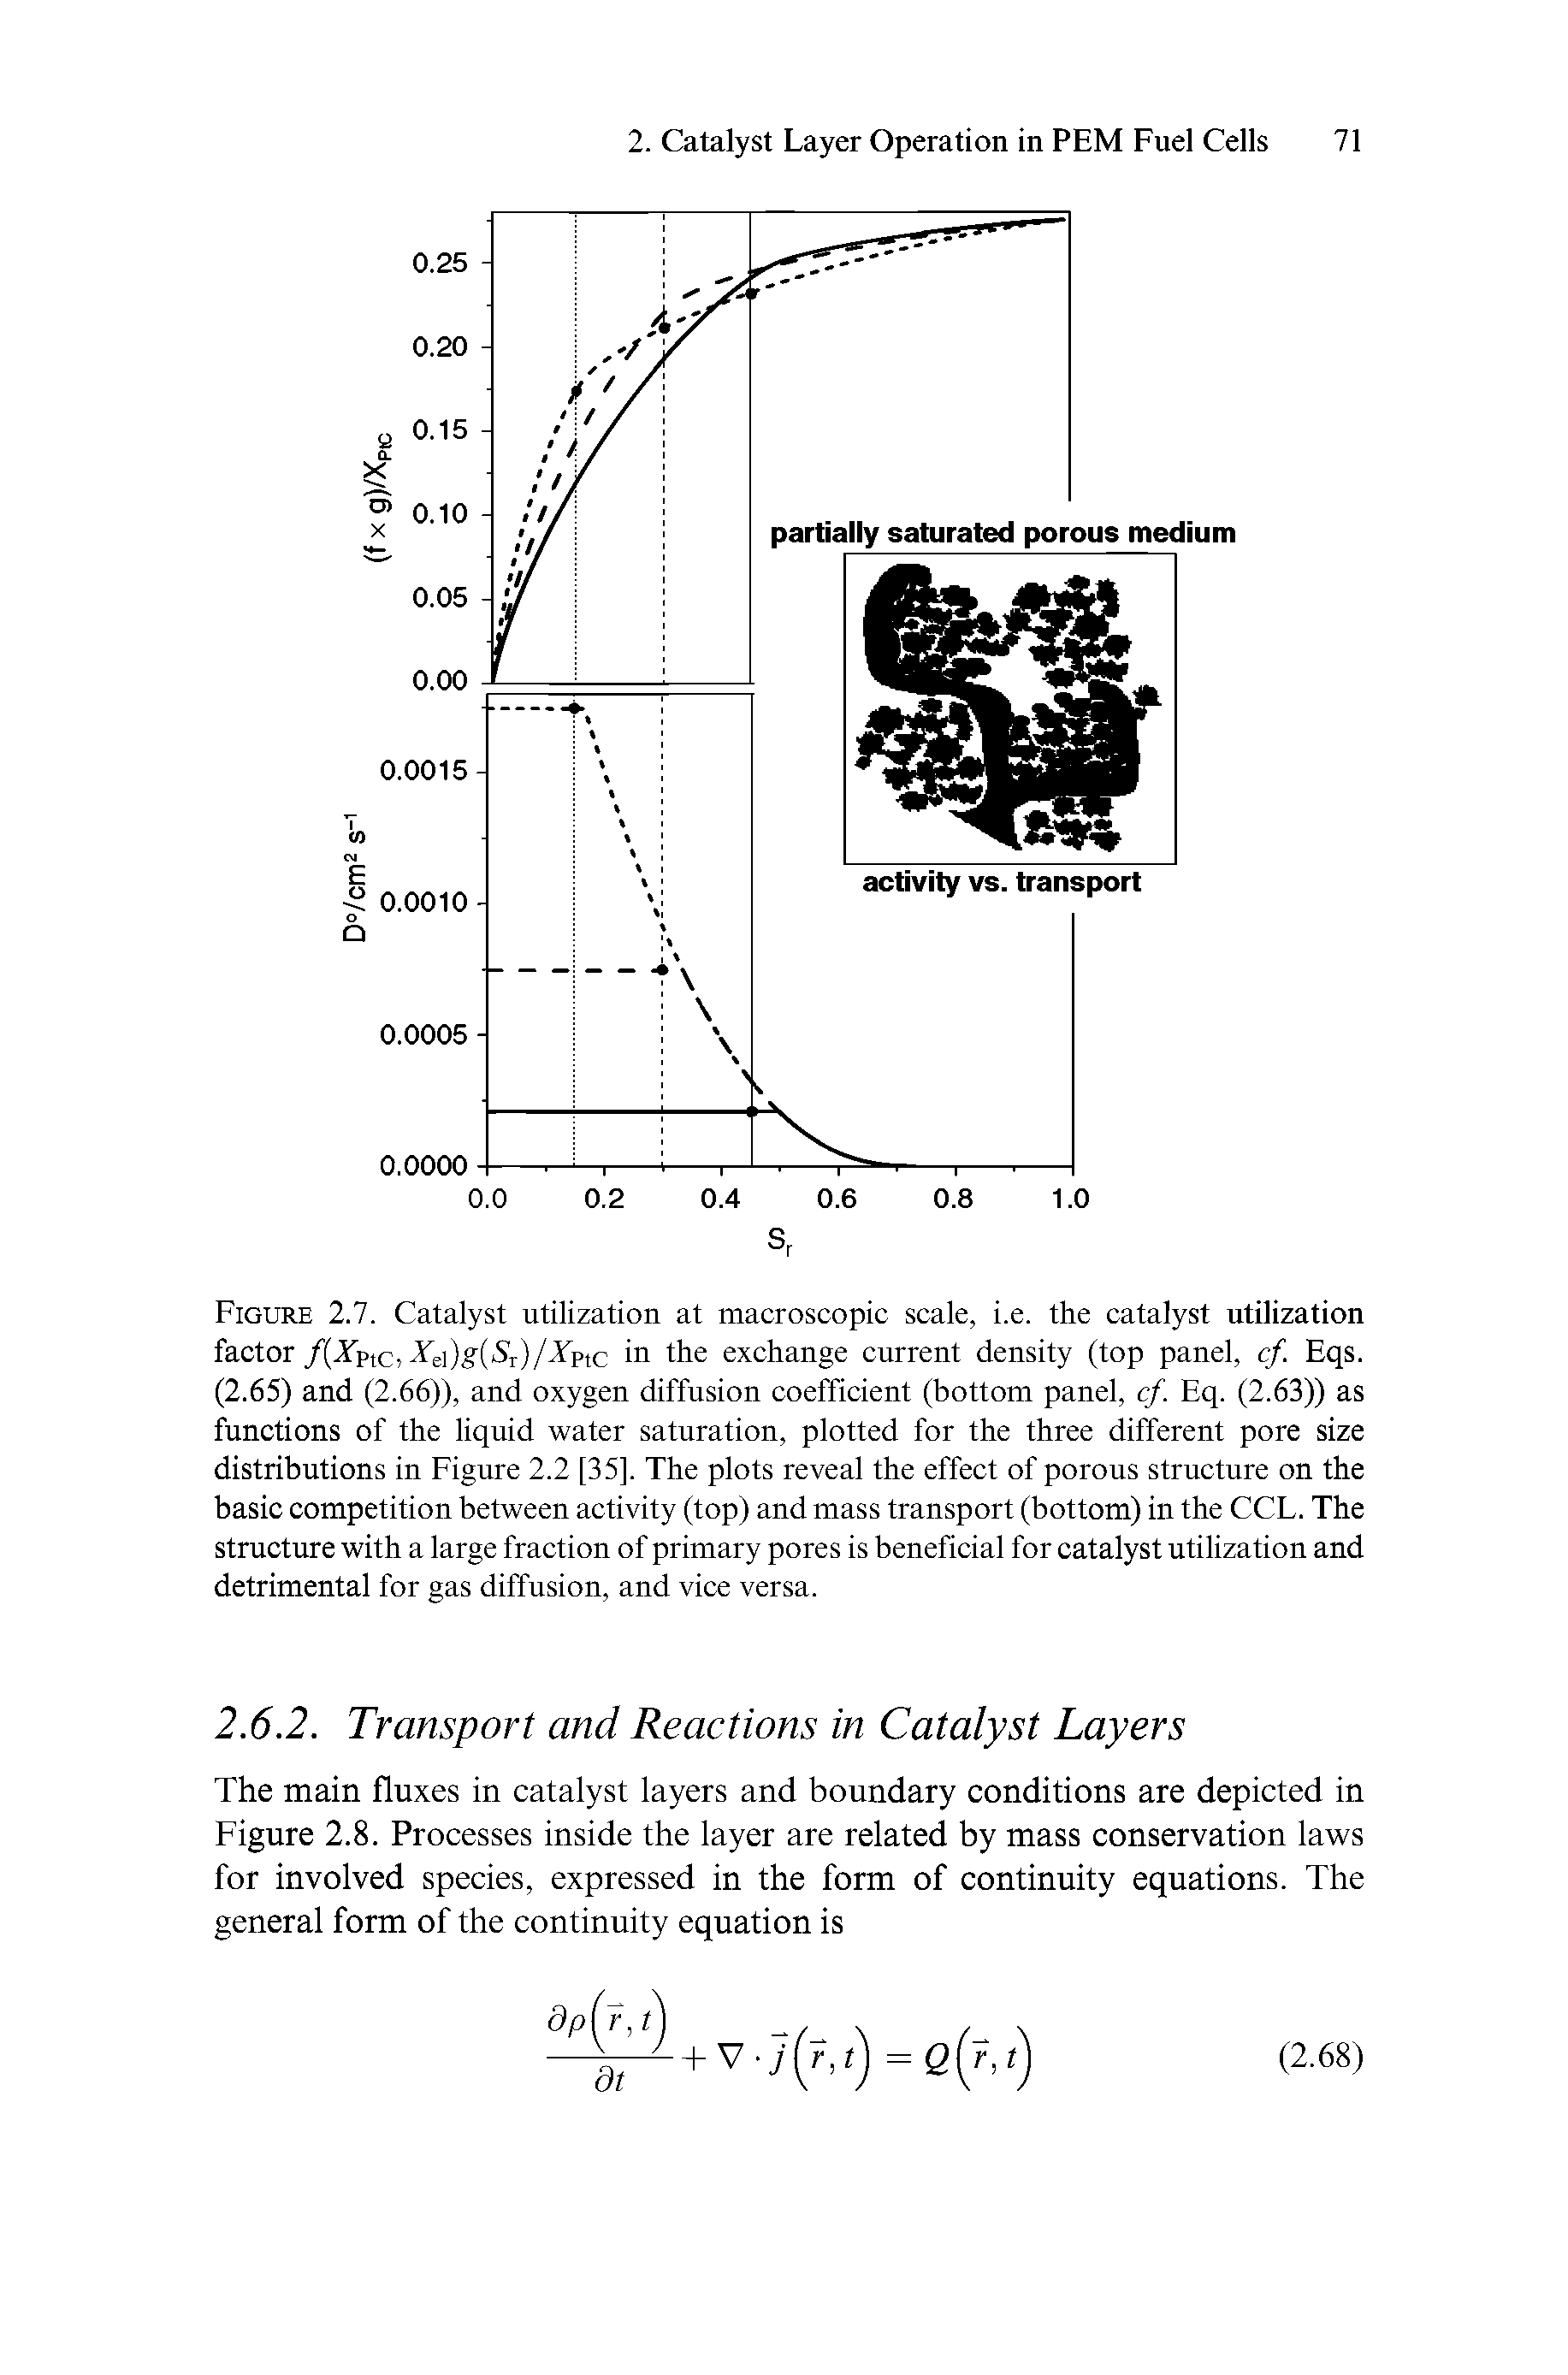 Figure 2.7. Catalyst utilization at macroscopic scale, i.e. the catalyst utilization factor /(Xptc, Xei) (>Sr)/Xptc in the exchange current density (top panel, cf. Eqs. (2.65) and (2.66)), and oxygen diffusion coefficient (bottom panel, cf. Eq. (2.63)) as functions of the liquid water saturation, plotted for the three different pore size distributions in Figure 2.2 [35]. The plots reveal the effect of porous structure on the basic competition between activity (top) and mass transport (bottom) in the CCL. The structure with a large fraction of primary pores is beneficial for catalyst utilization and detrimental for gas diffusion, and vice versa.